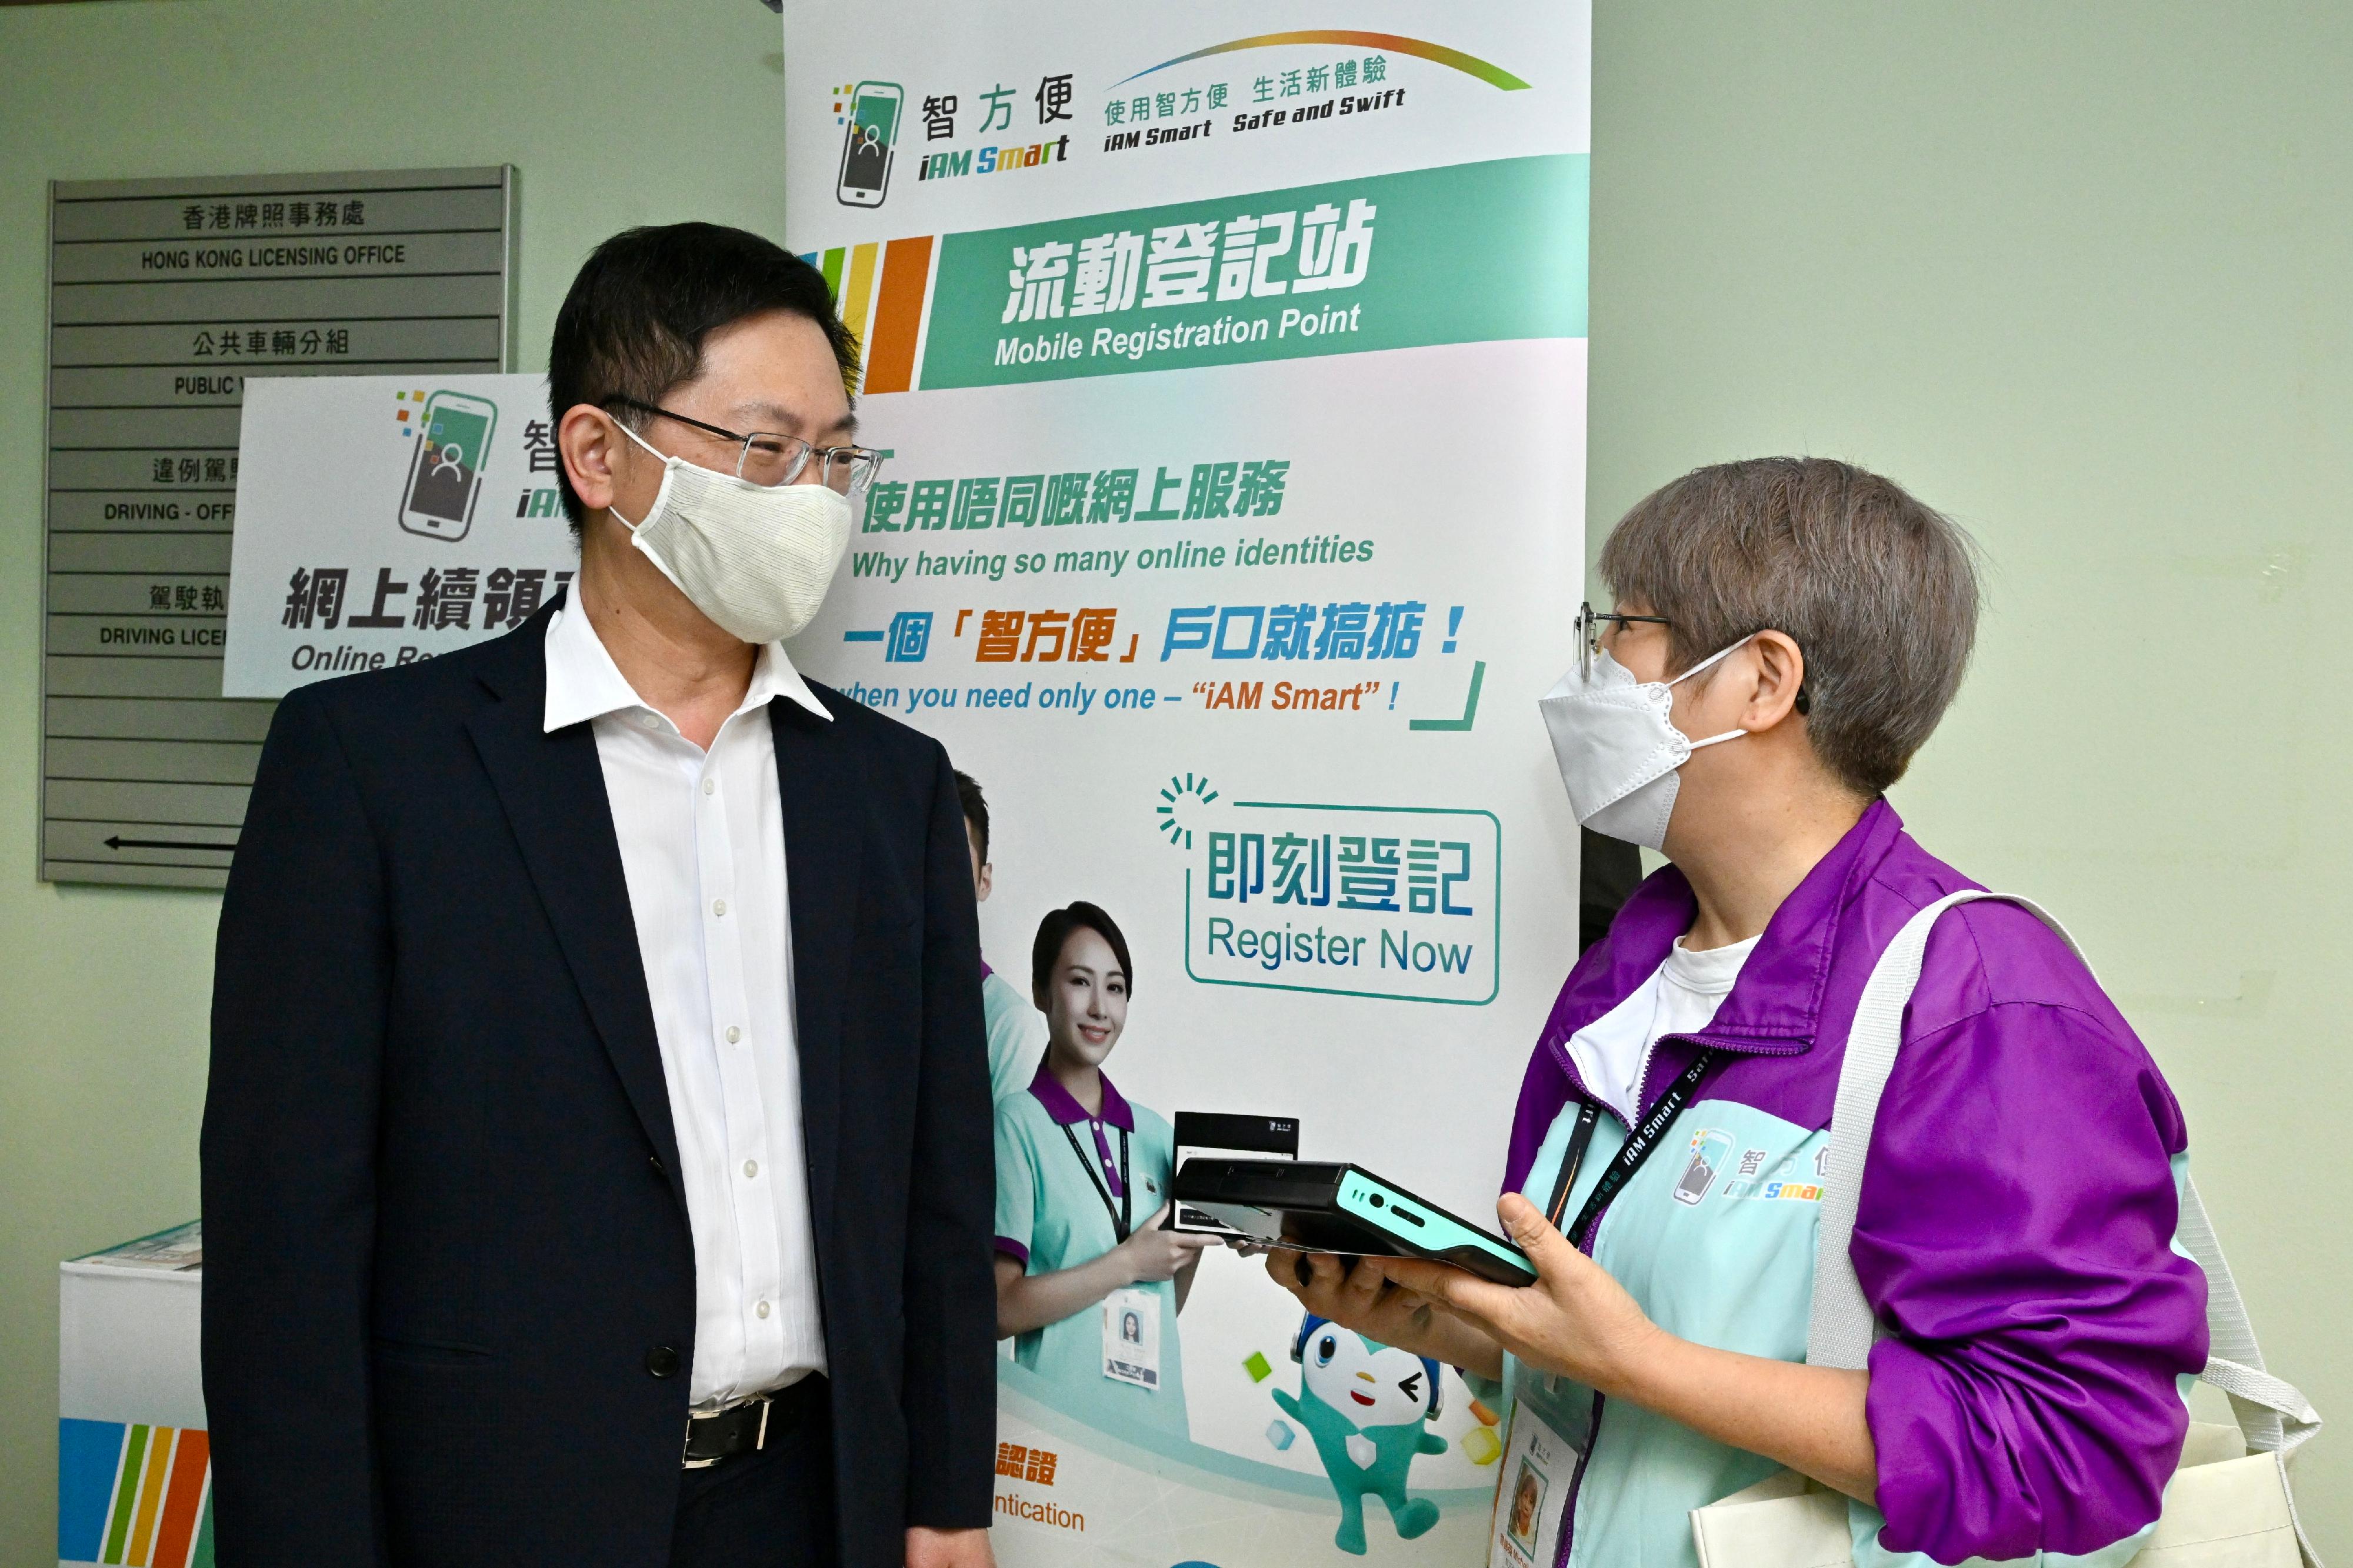 The Secretary for Innovation and Technology, Mr Alfred Sit (left), today (May 19) inspects the "iAM Smart" mobile registration team located at the Transport Department's Hong Kong Licensing Office and encourages the team to help more people register for "iAM Smart+".